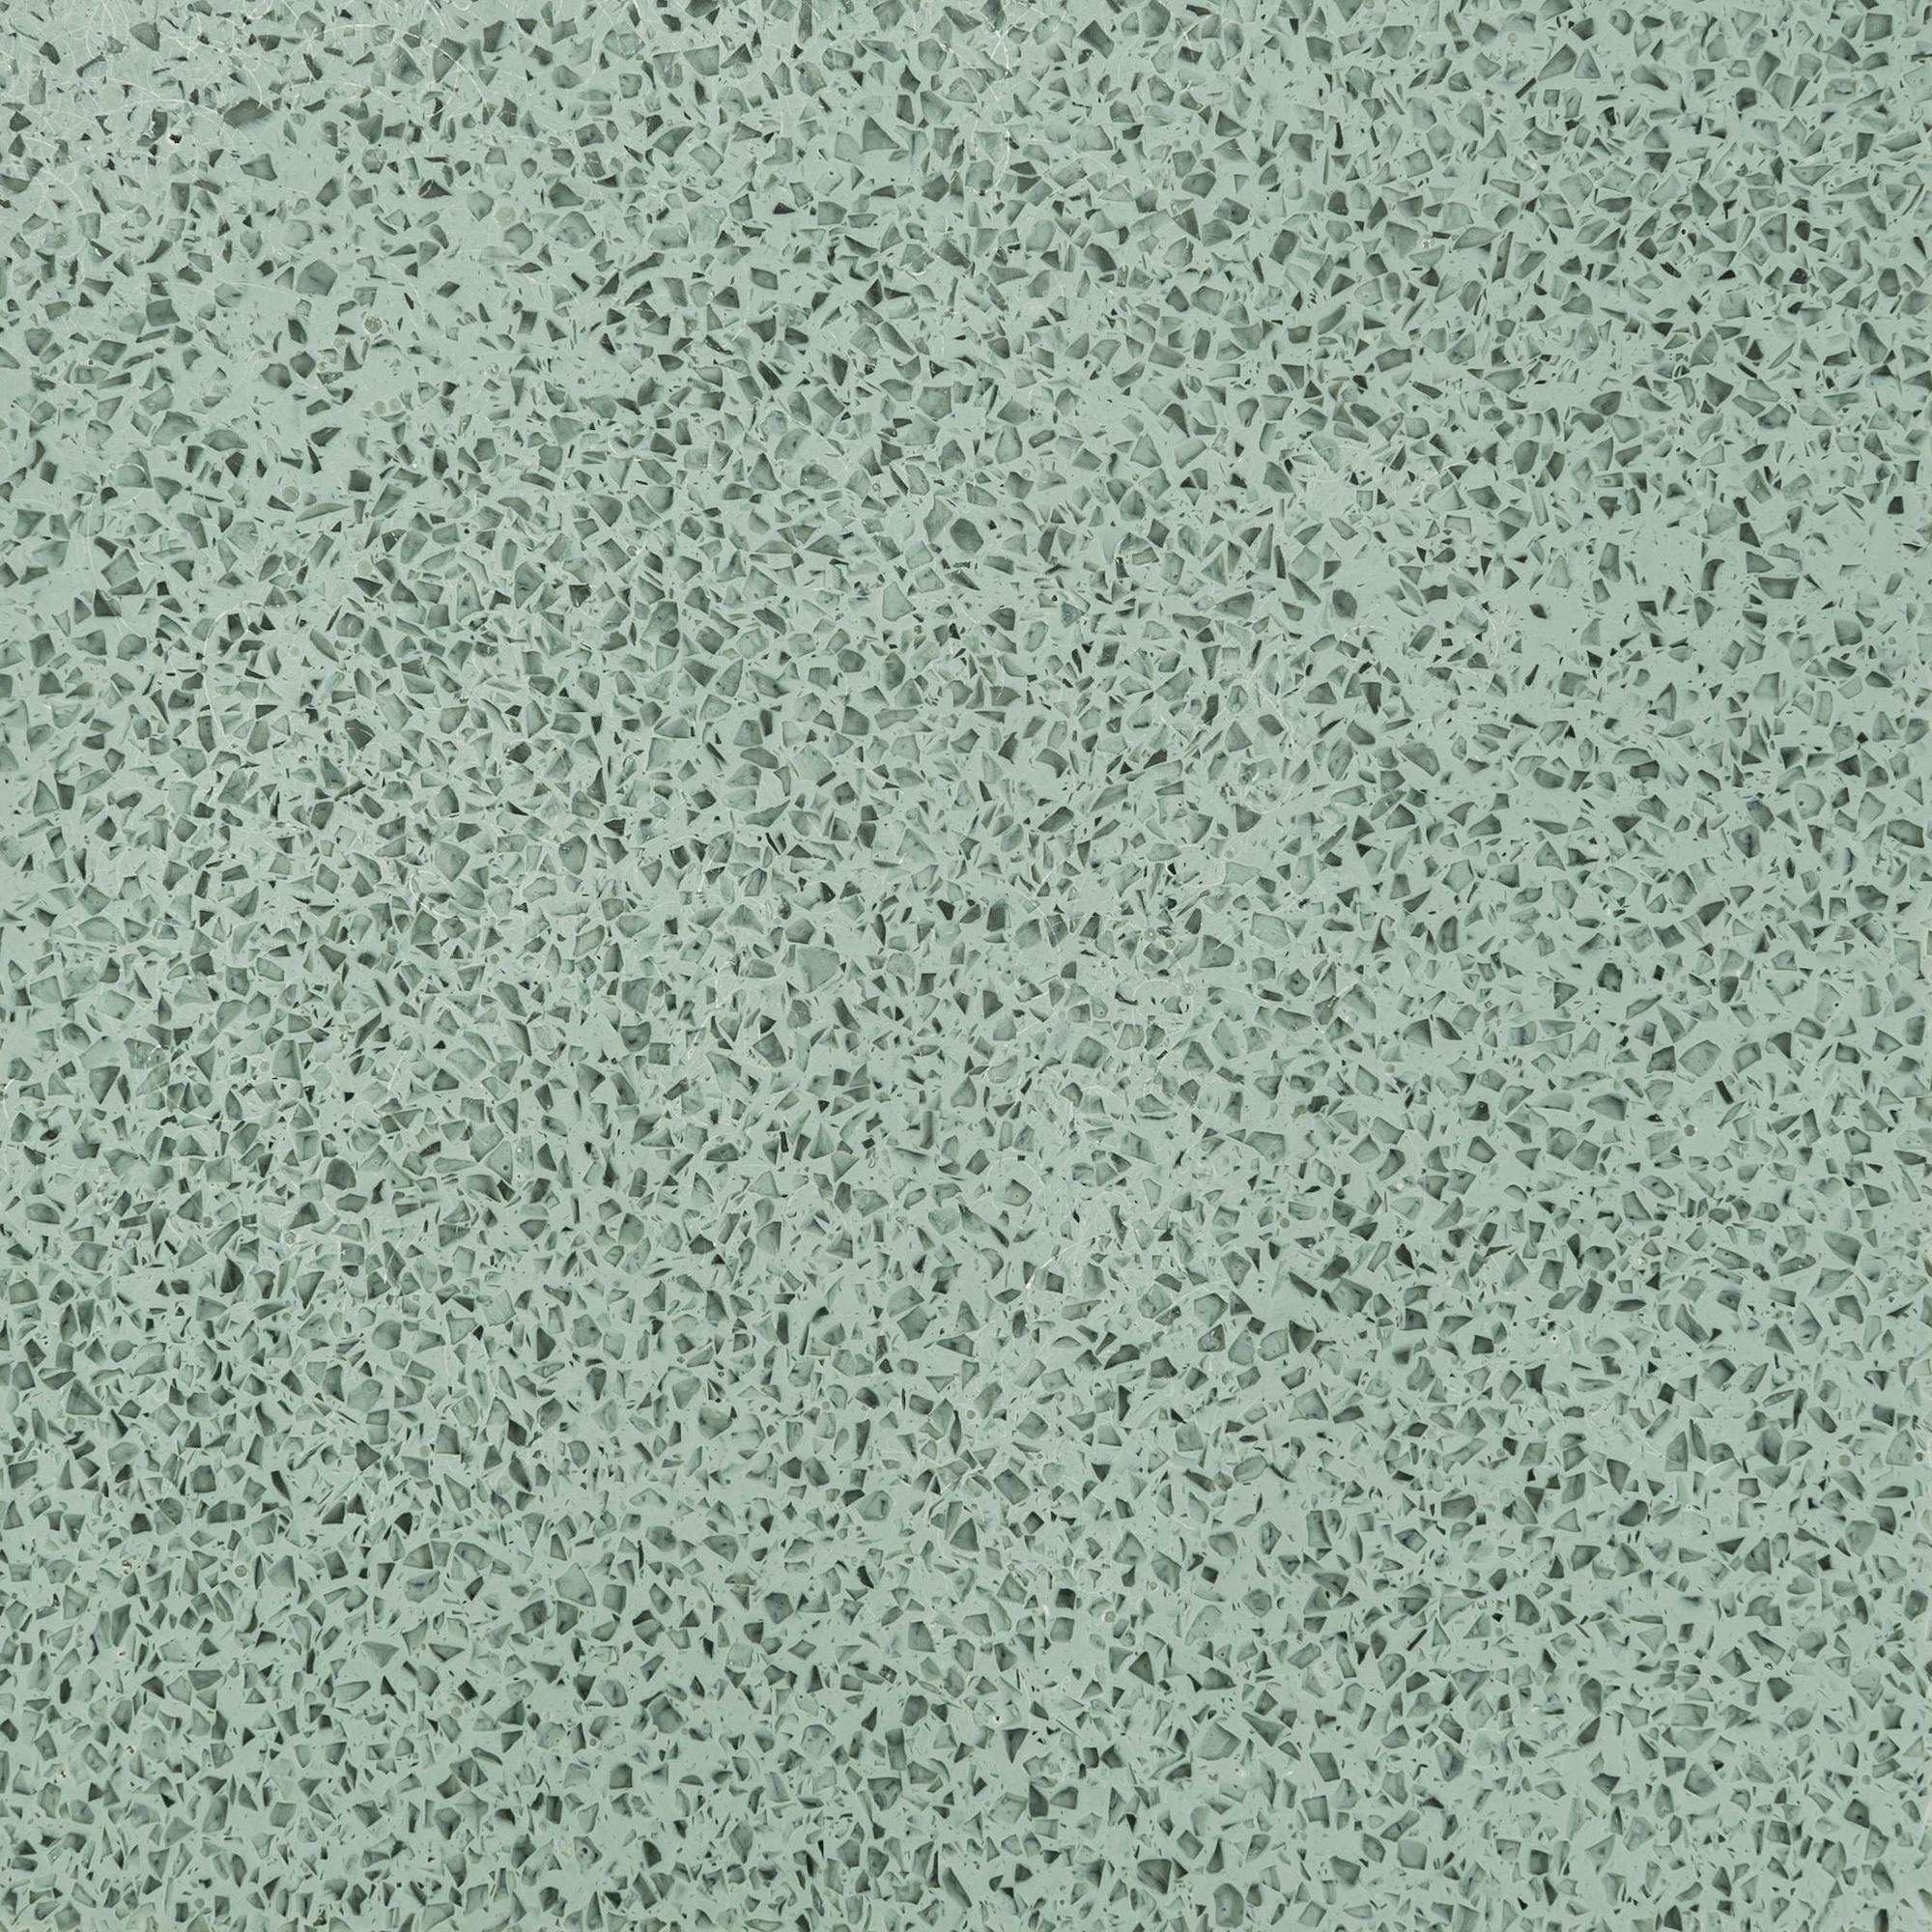 D0840 00 Durat 840 Grey green clear small speckles sample